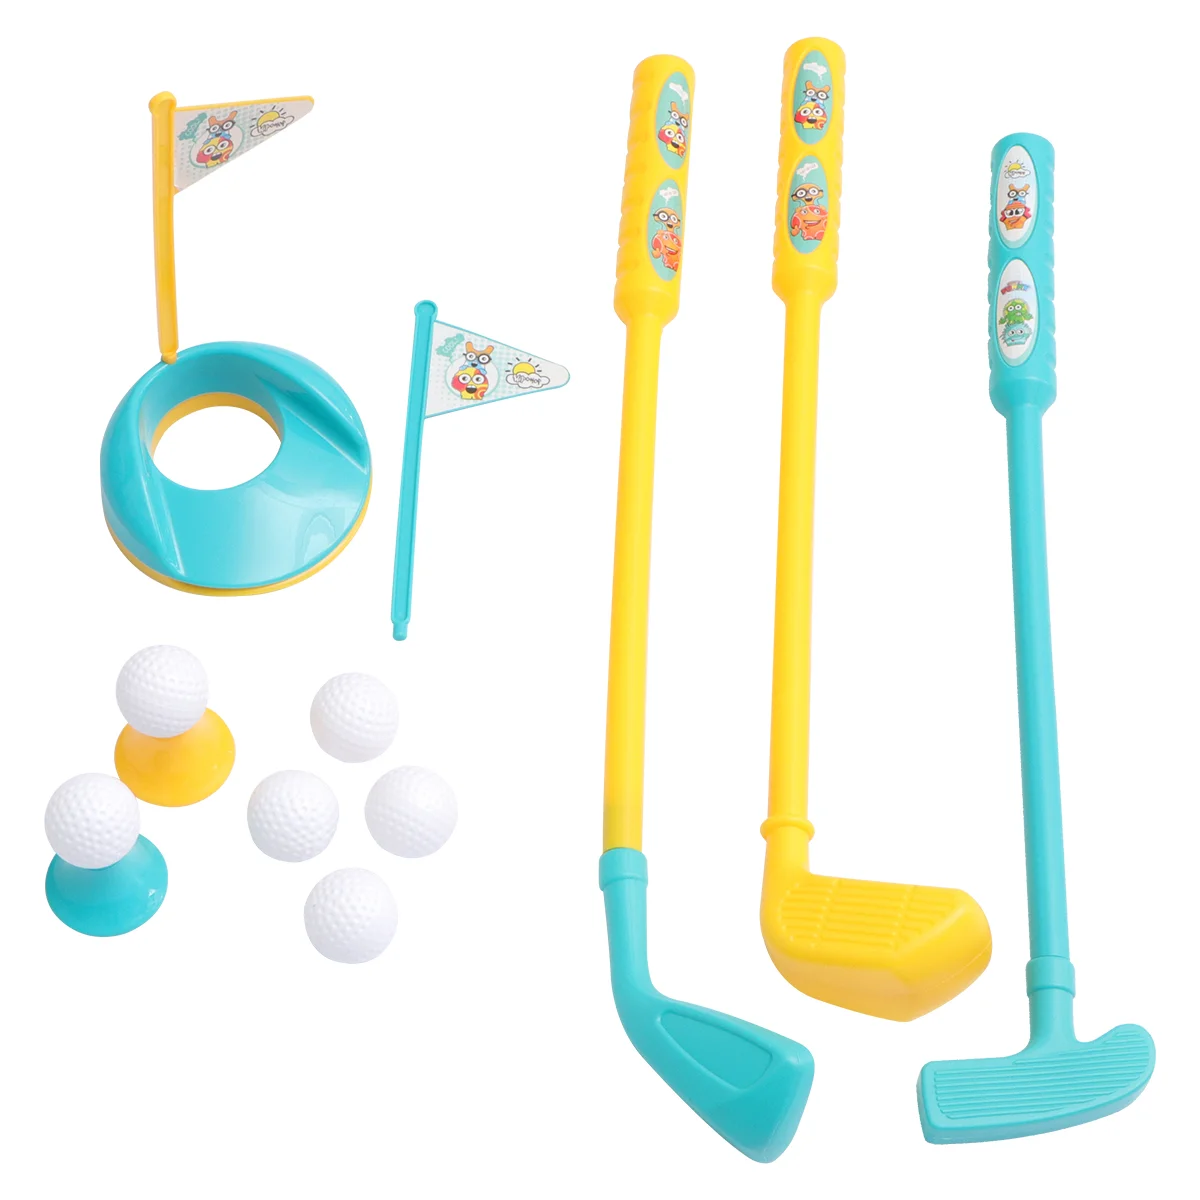 

Toy Set Toys Outdoor Clubs Lawn Early Educational Training Children Mini Golfer Kids Indoor Toddler Outdoors Exercise Kid Suits